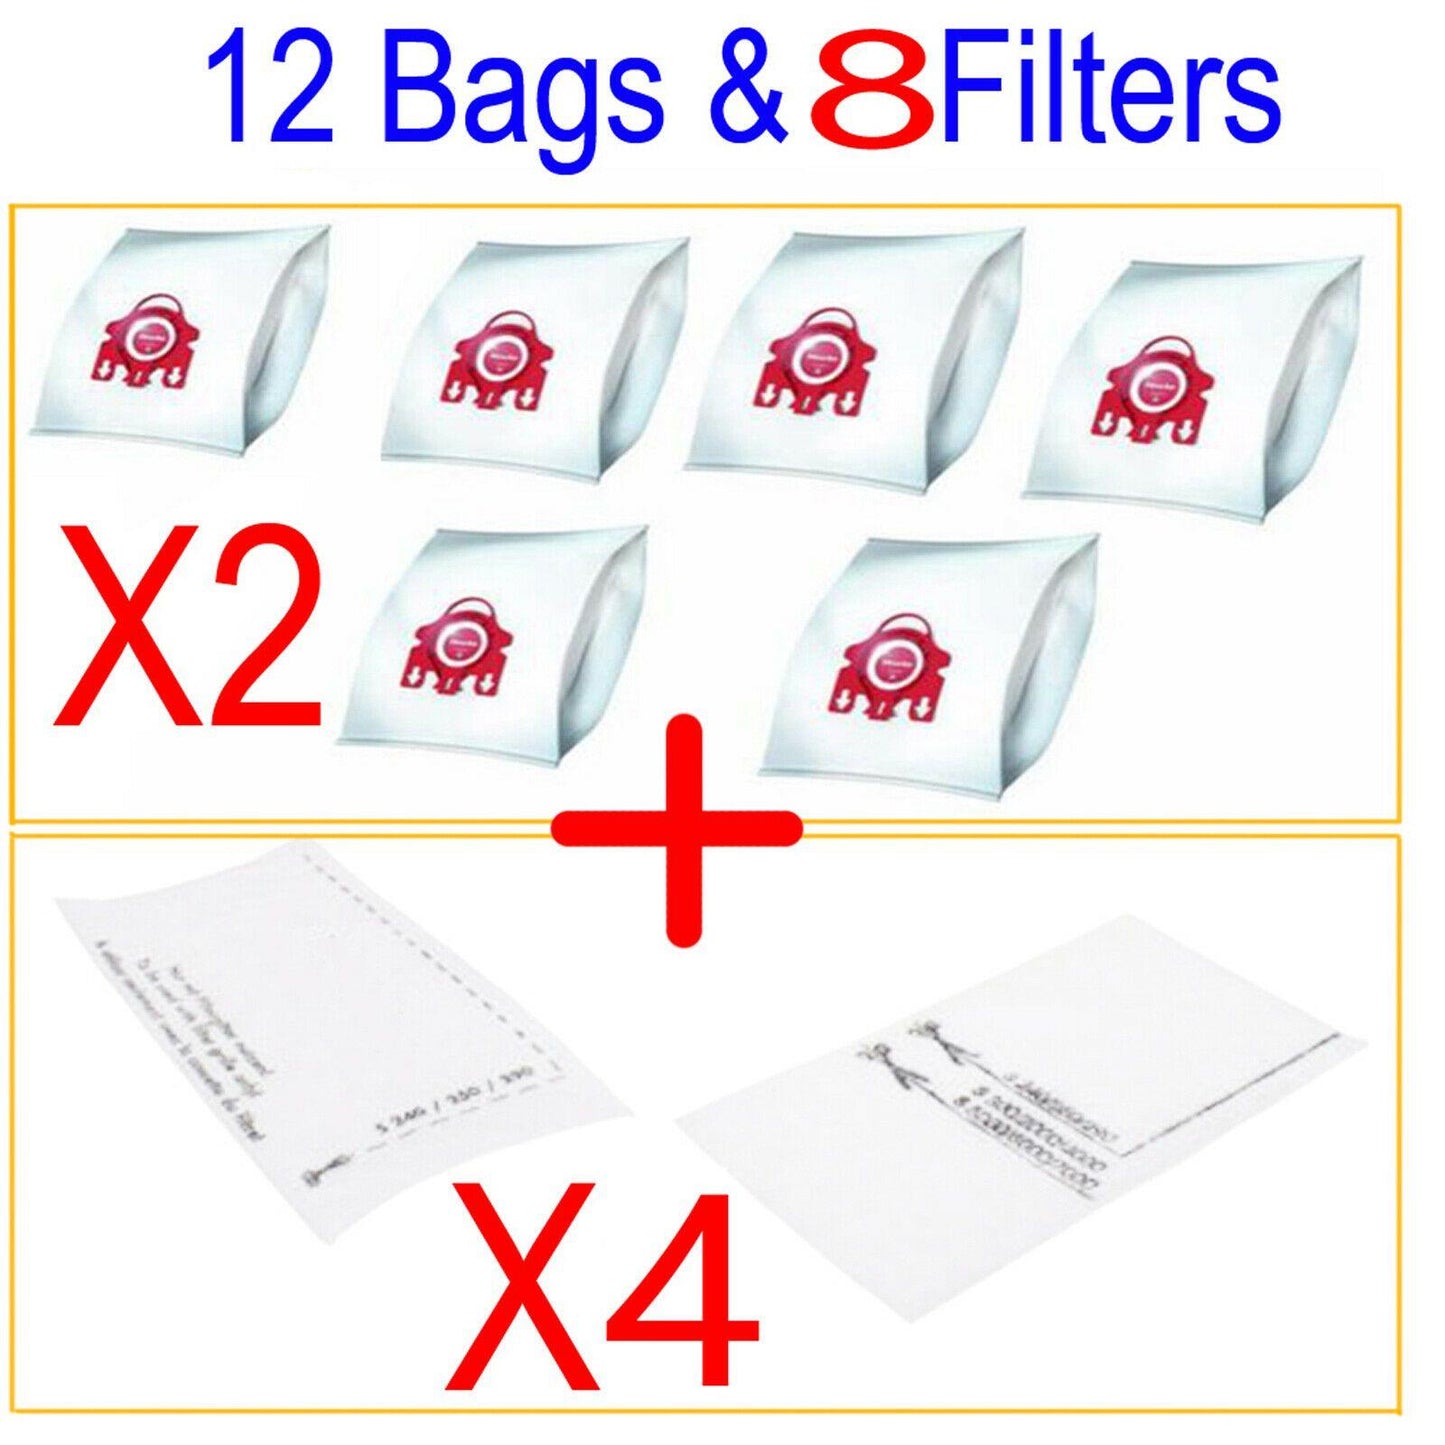 12 Synthetic Dust Bags & 8 Filters For Miele FJM S700 S500 S300 S200 Series Sparesbarn